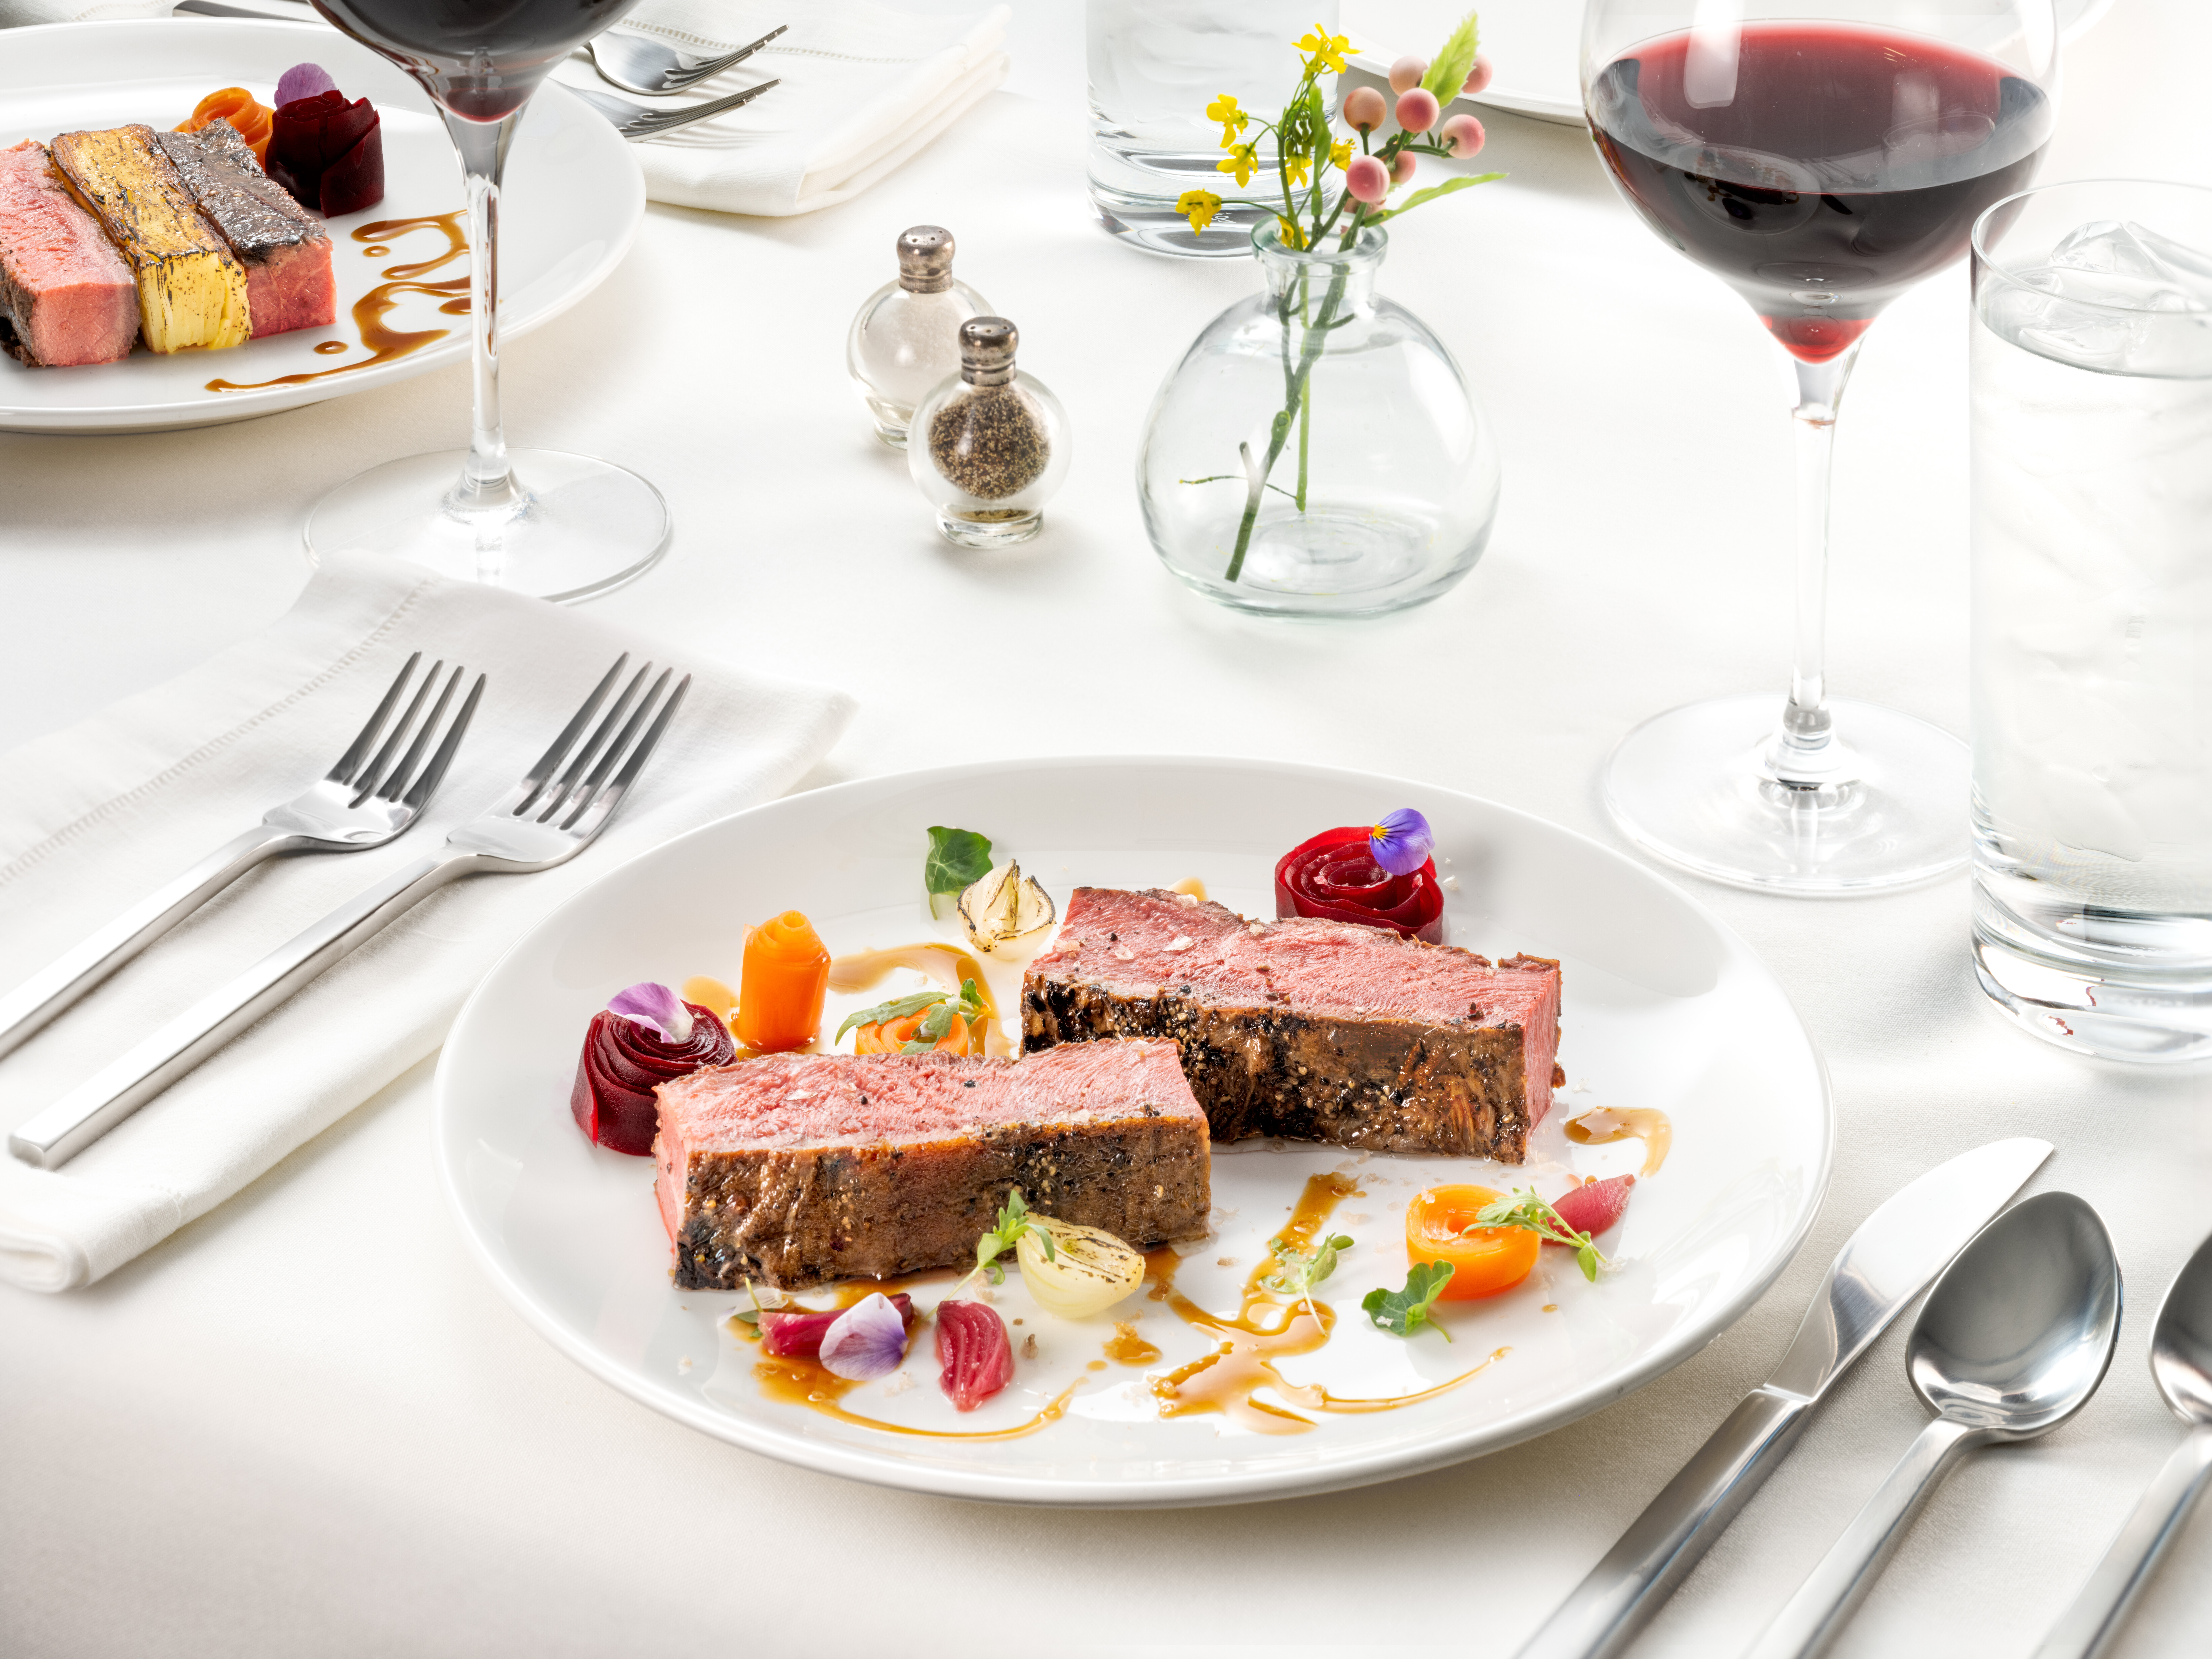 Beef dish served on white tablecloth